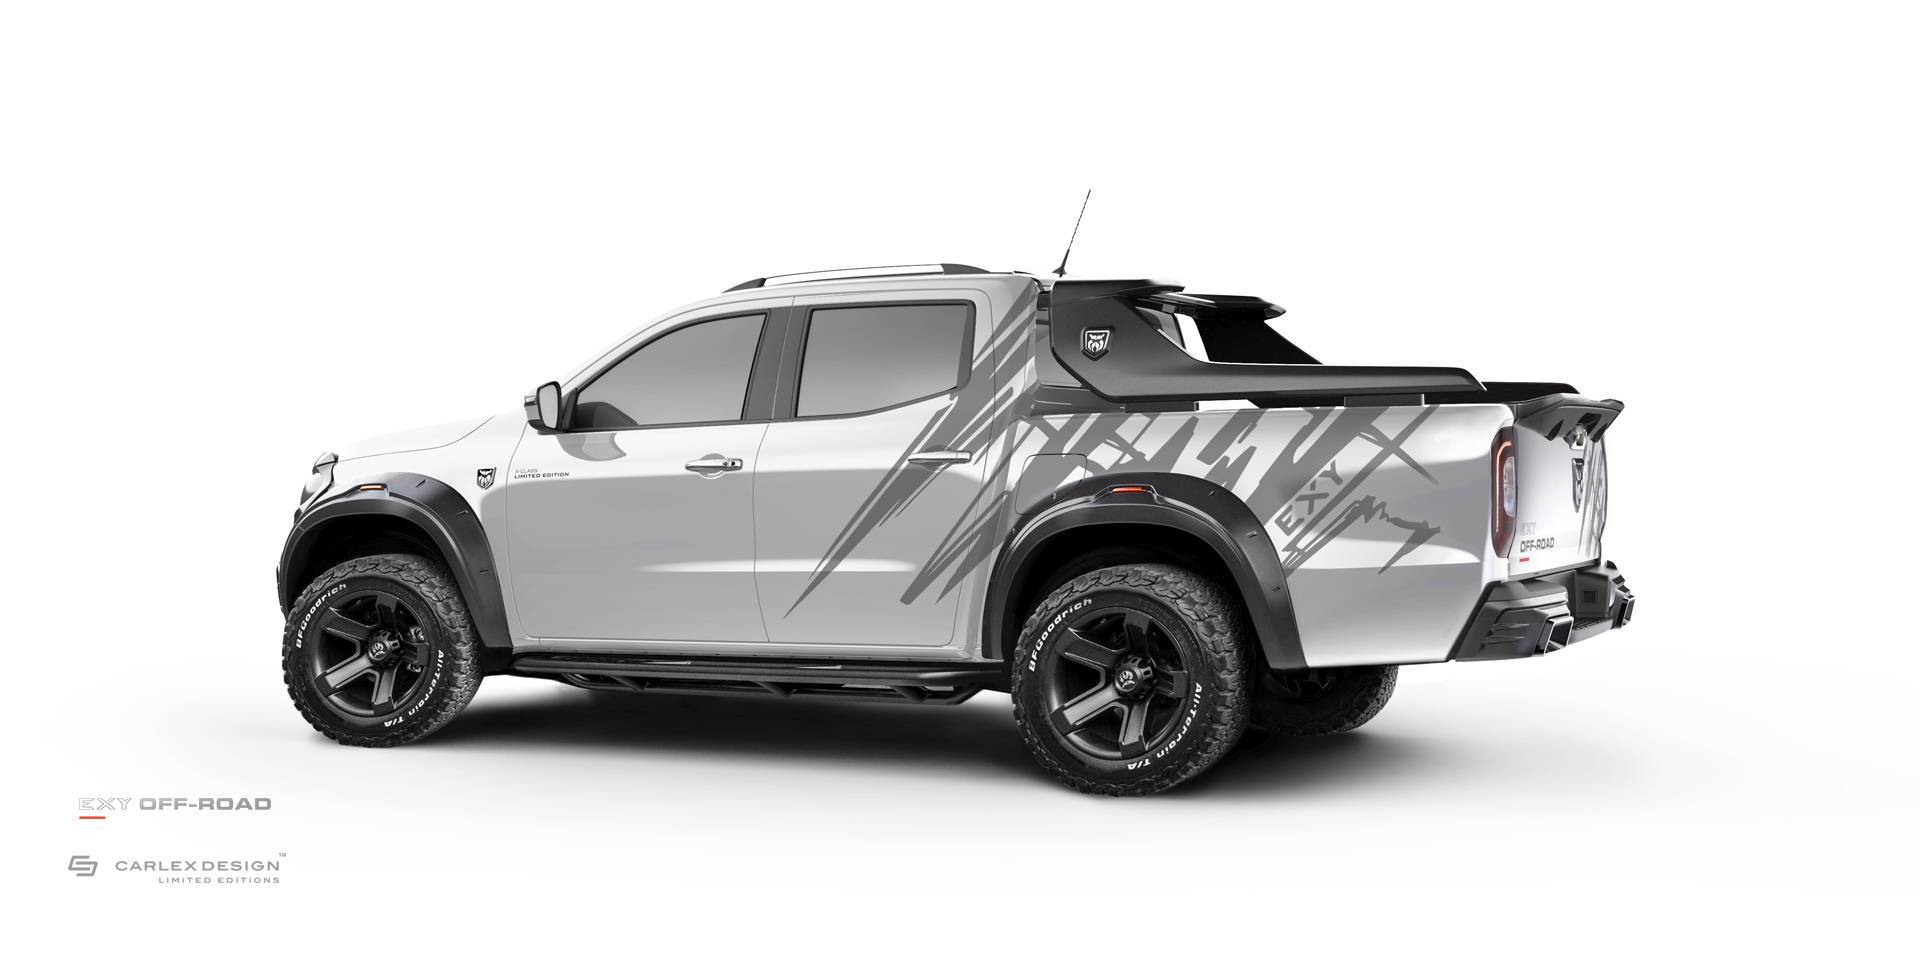 Carlex Design EXY OFF-ROAD Body kit for Mercedes X-Class NEW MODEL